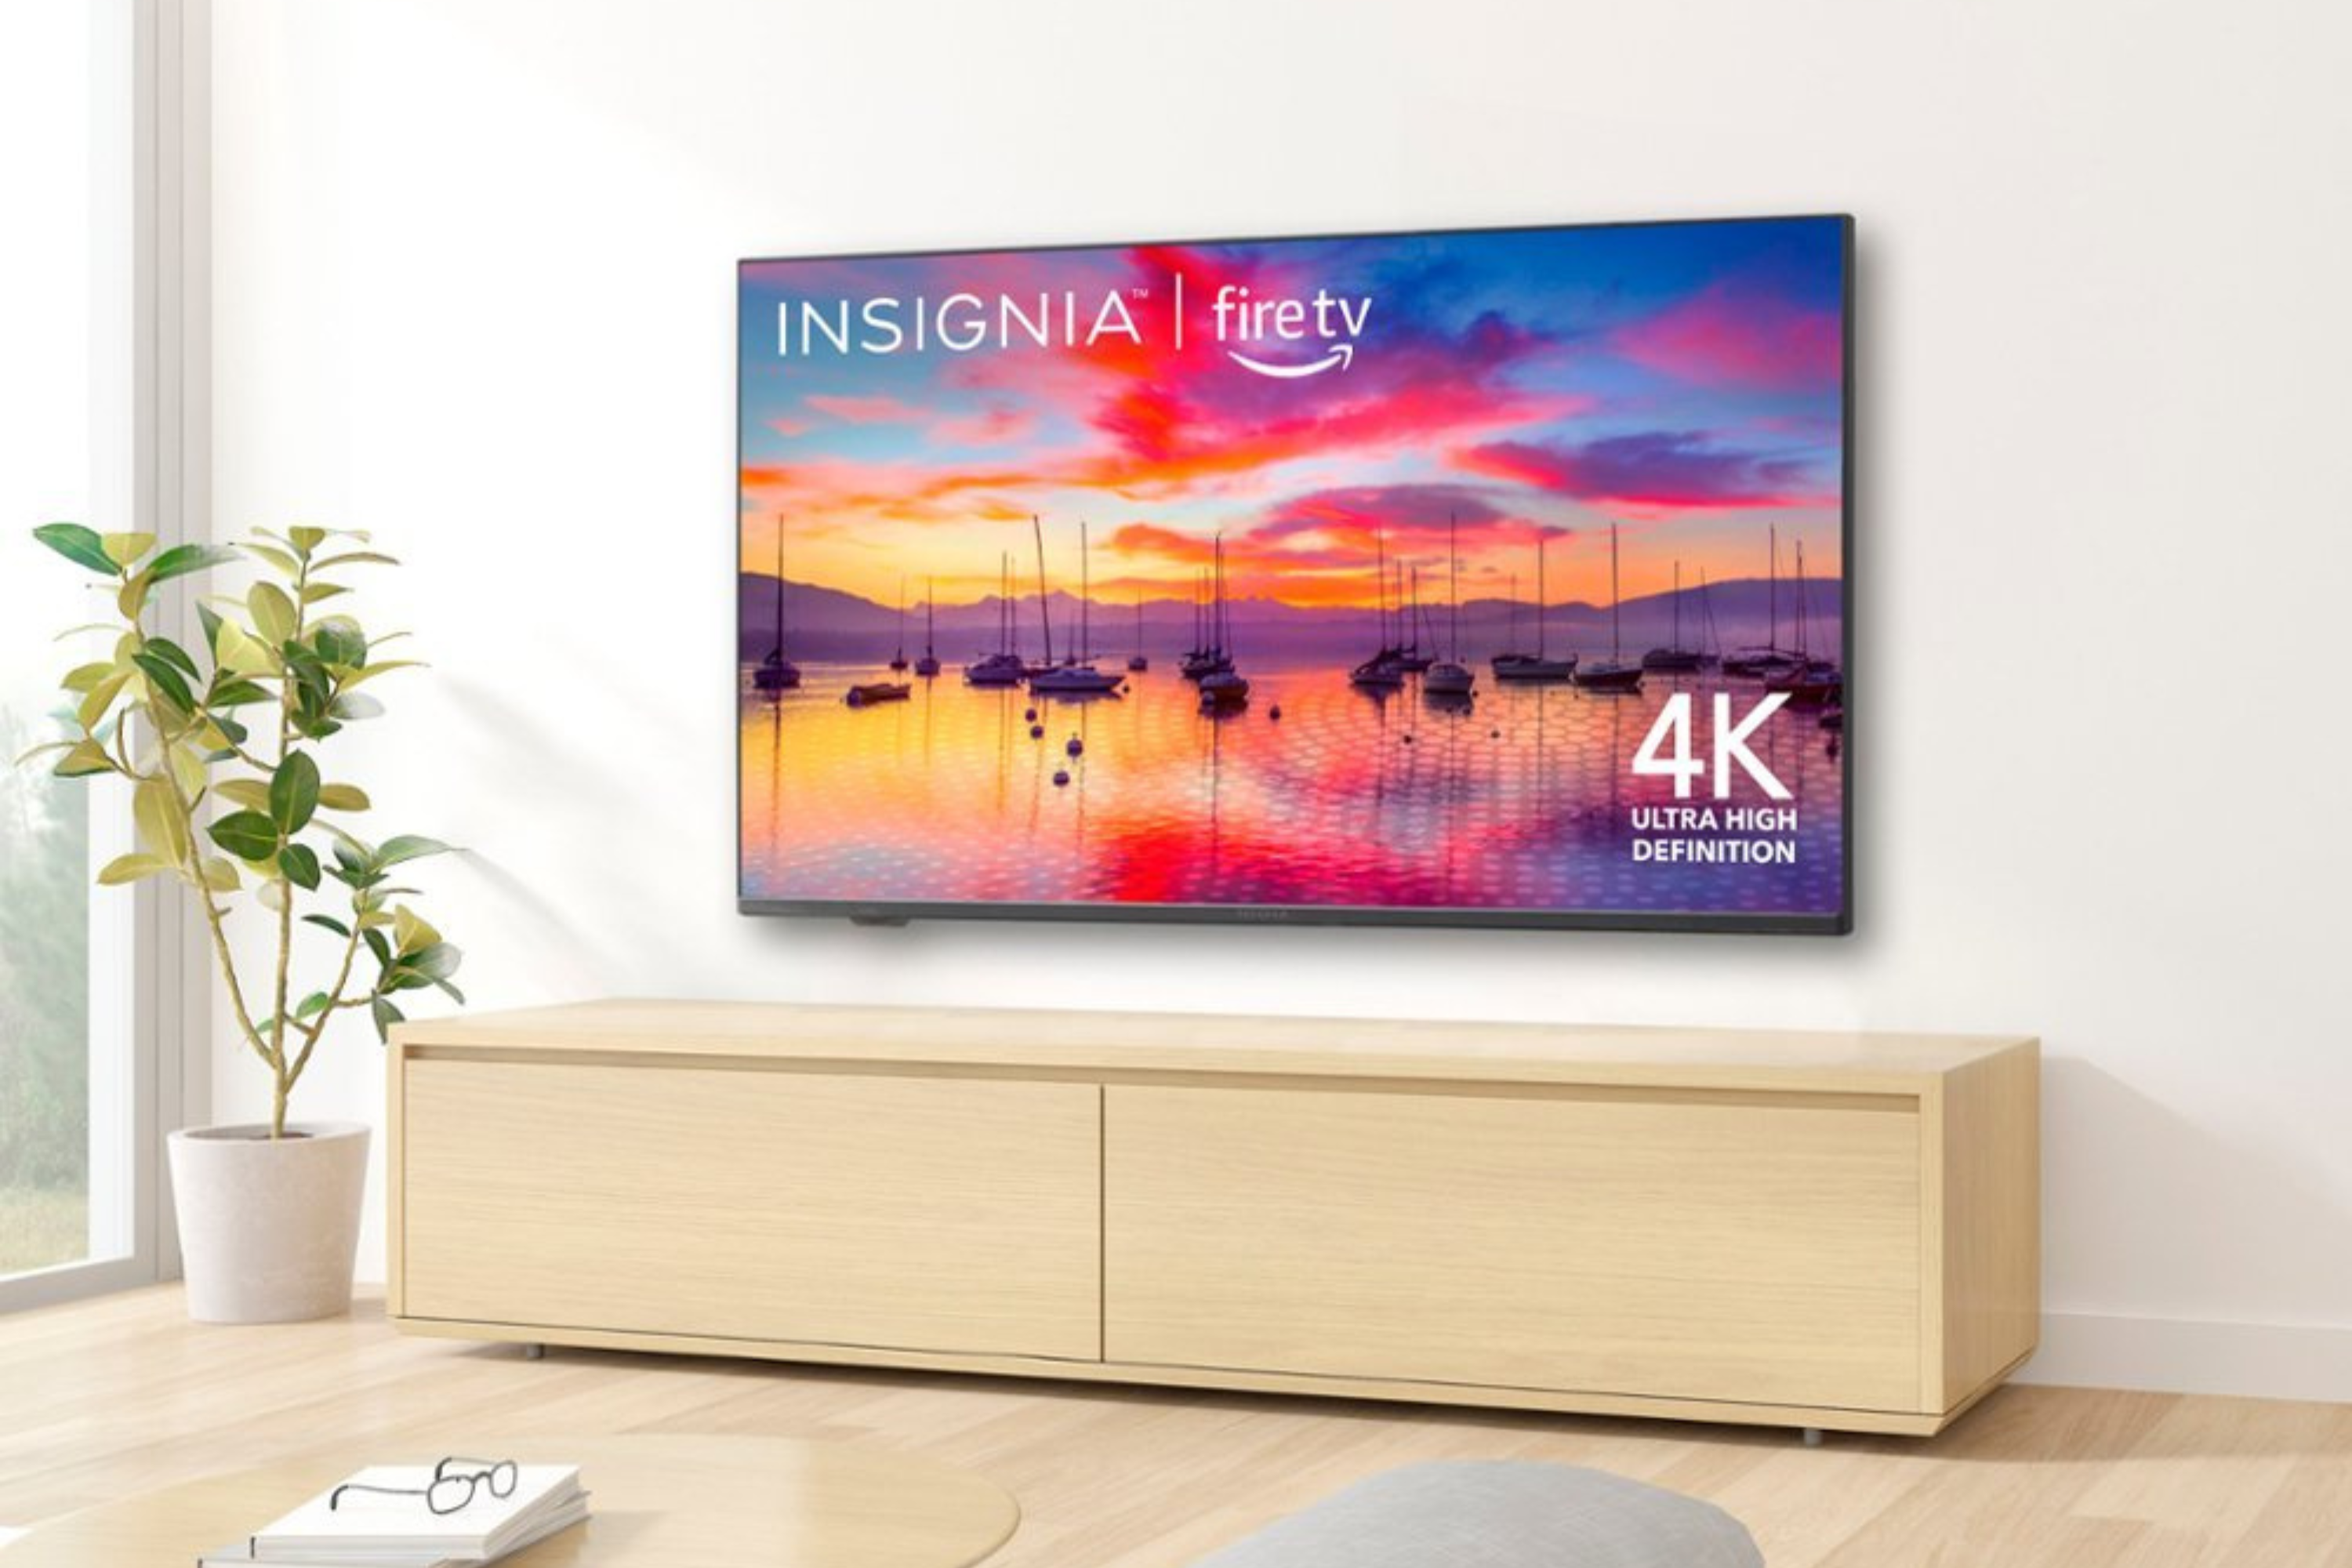 Insignia TV mounted to the wall with vibrant display in brightly lit room